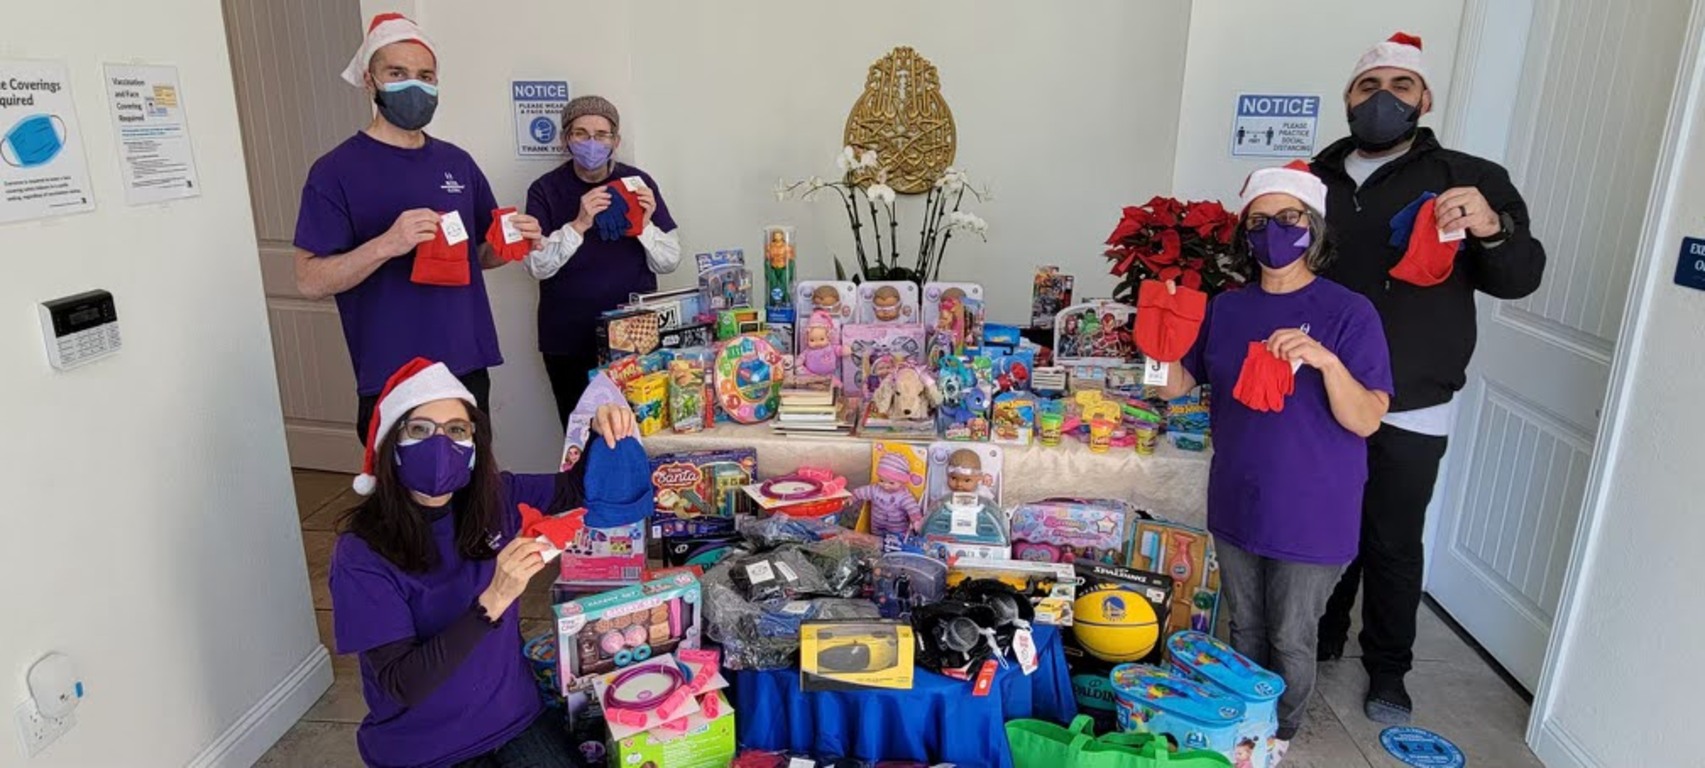 Albany Mayor Ge'Nell Gary Joins M.T.O. Berkeley in Toy Drive